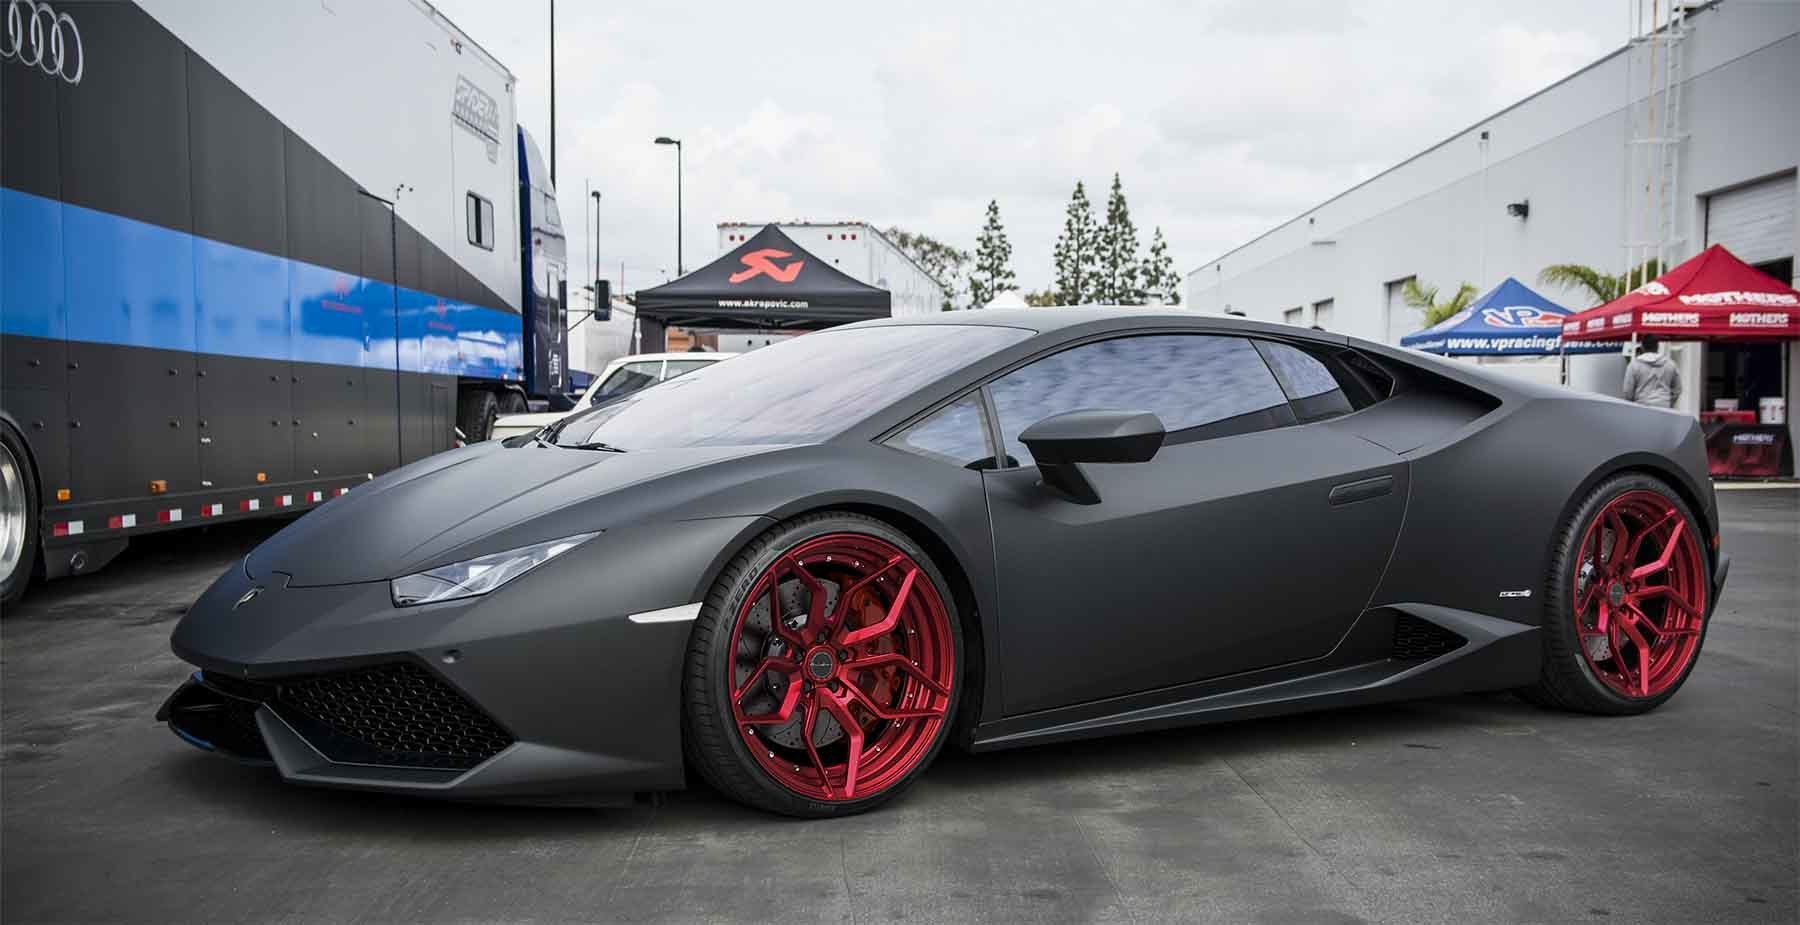 images-products-1-1846-232974134-matte-black-huracan-brixton-forged-pf9-carbon-red-matte.jpg